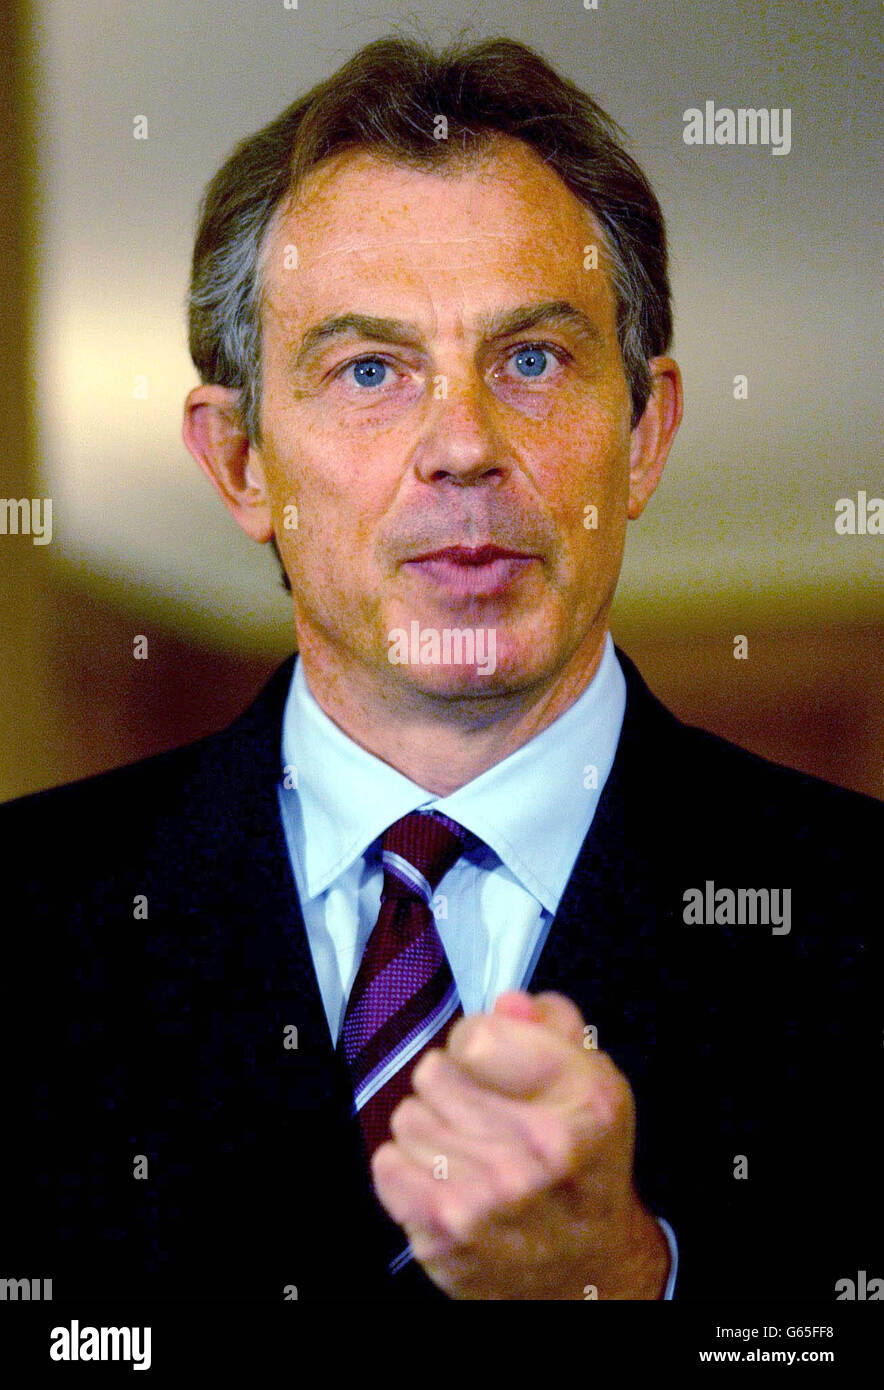 Prime Minister Tony Blair speaks at a Downing Street Press Conference. Blair said Monday that the Iraqi leader Saddam Hussein can still peacefully end the standoff over weapons of mass destruction, * .. but warned that he will be disarmed by force if he does not. Stock Photo